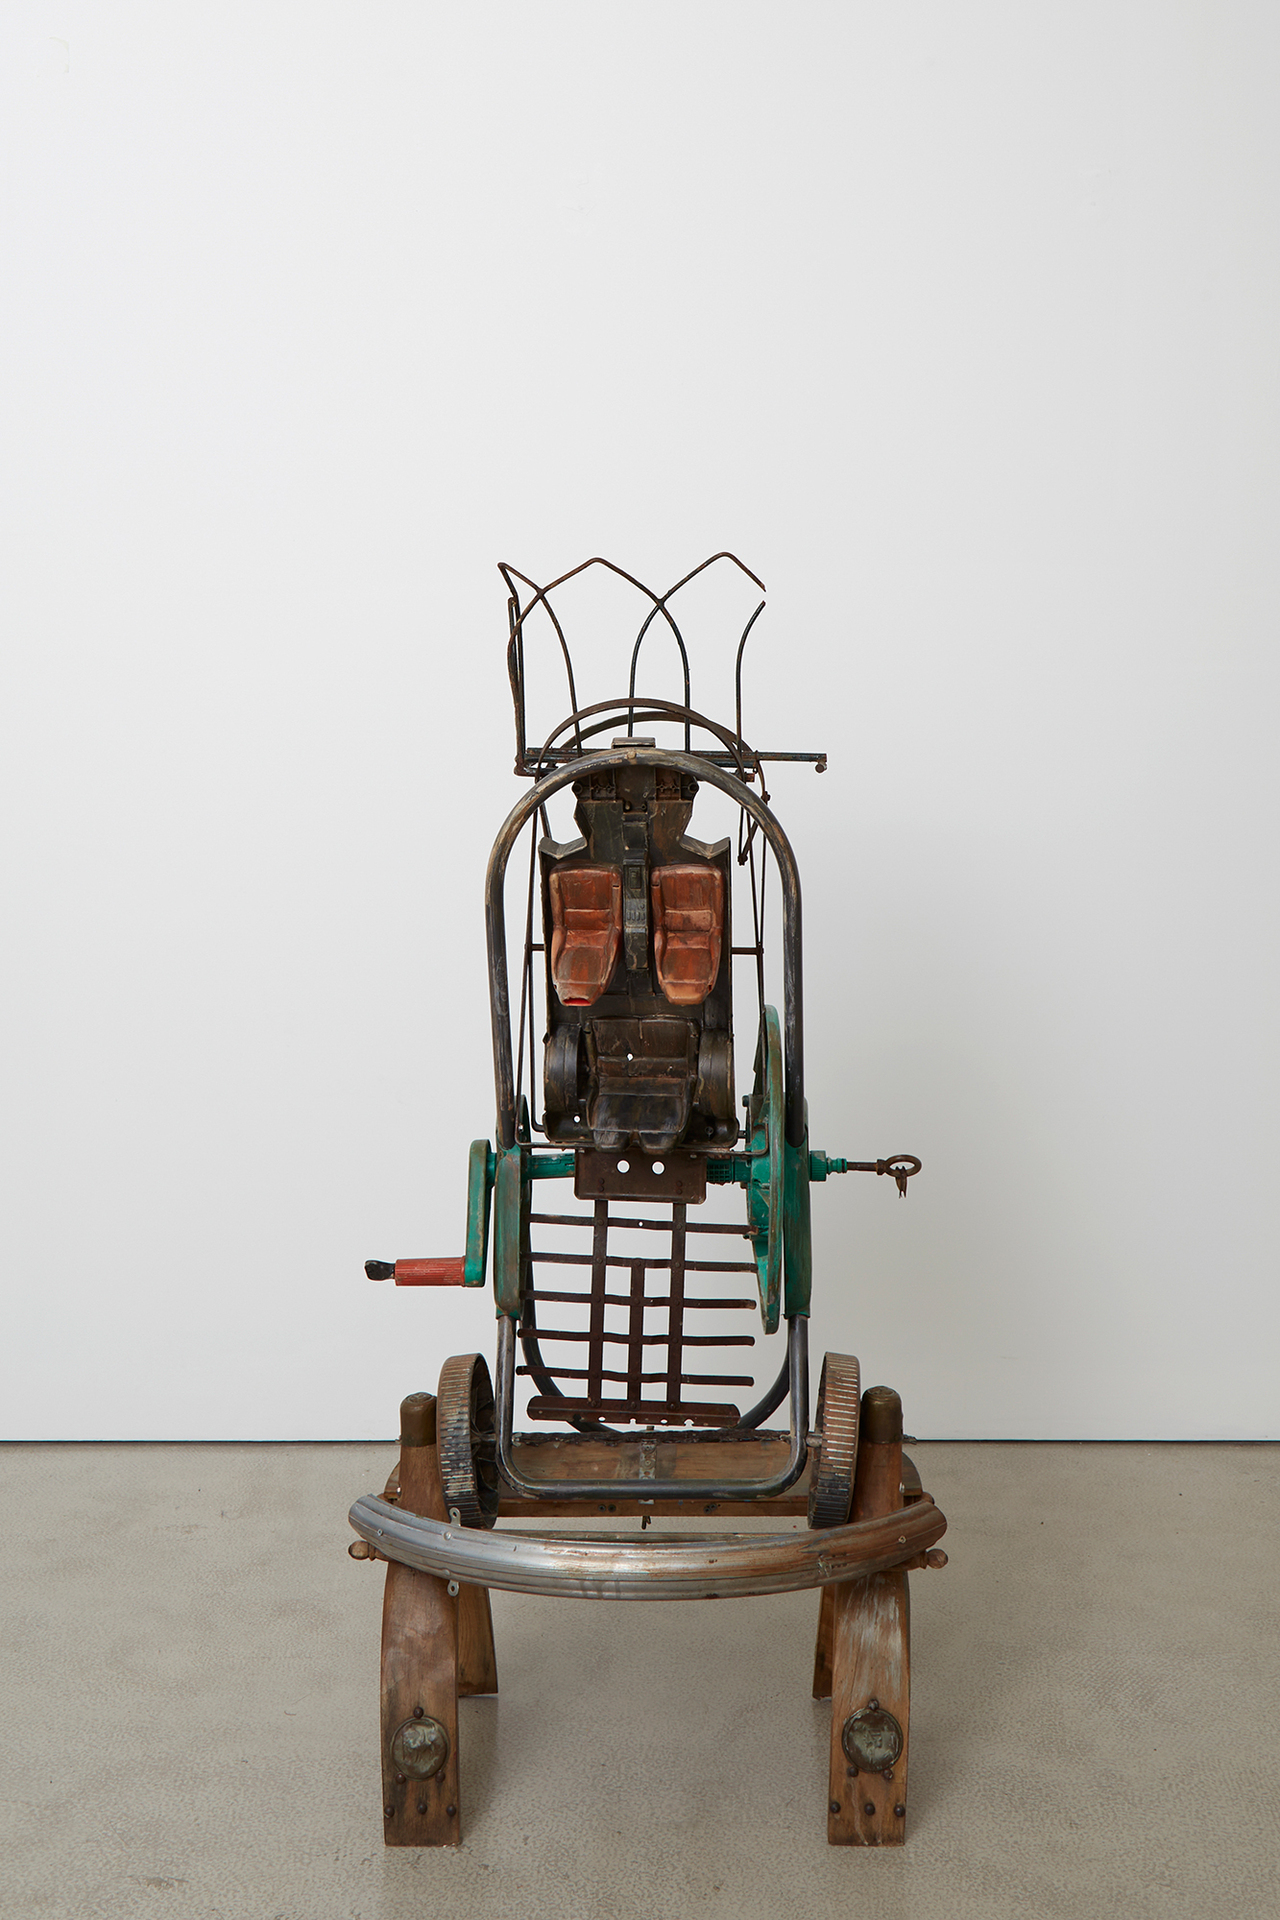 Isabella Costabile, Spider Gentrification, 2021 Mixed media on wooden camel saddle, plastic hose trolley, bicycle mudguard, iron grill, keys, plastic toy, iron tools, 128 x 60 x 60 cm